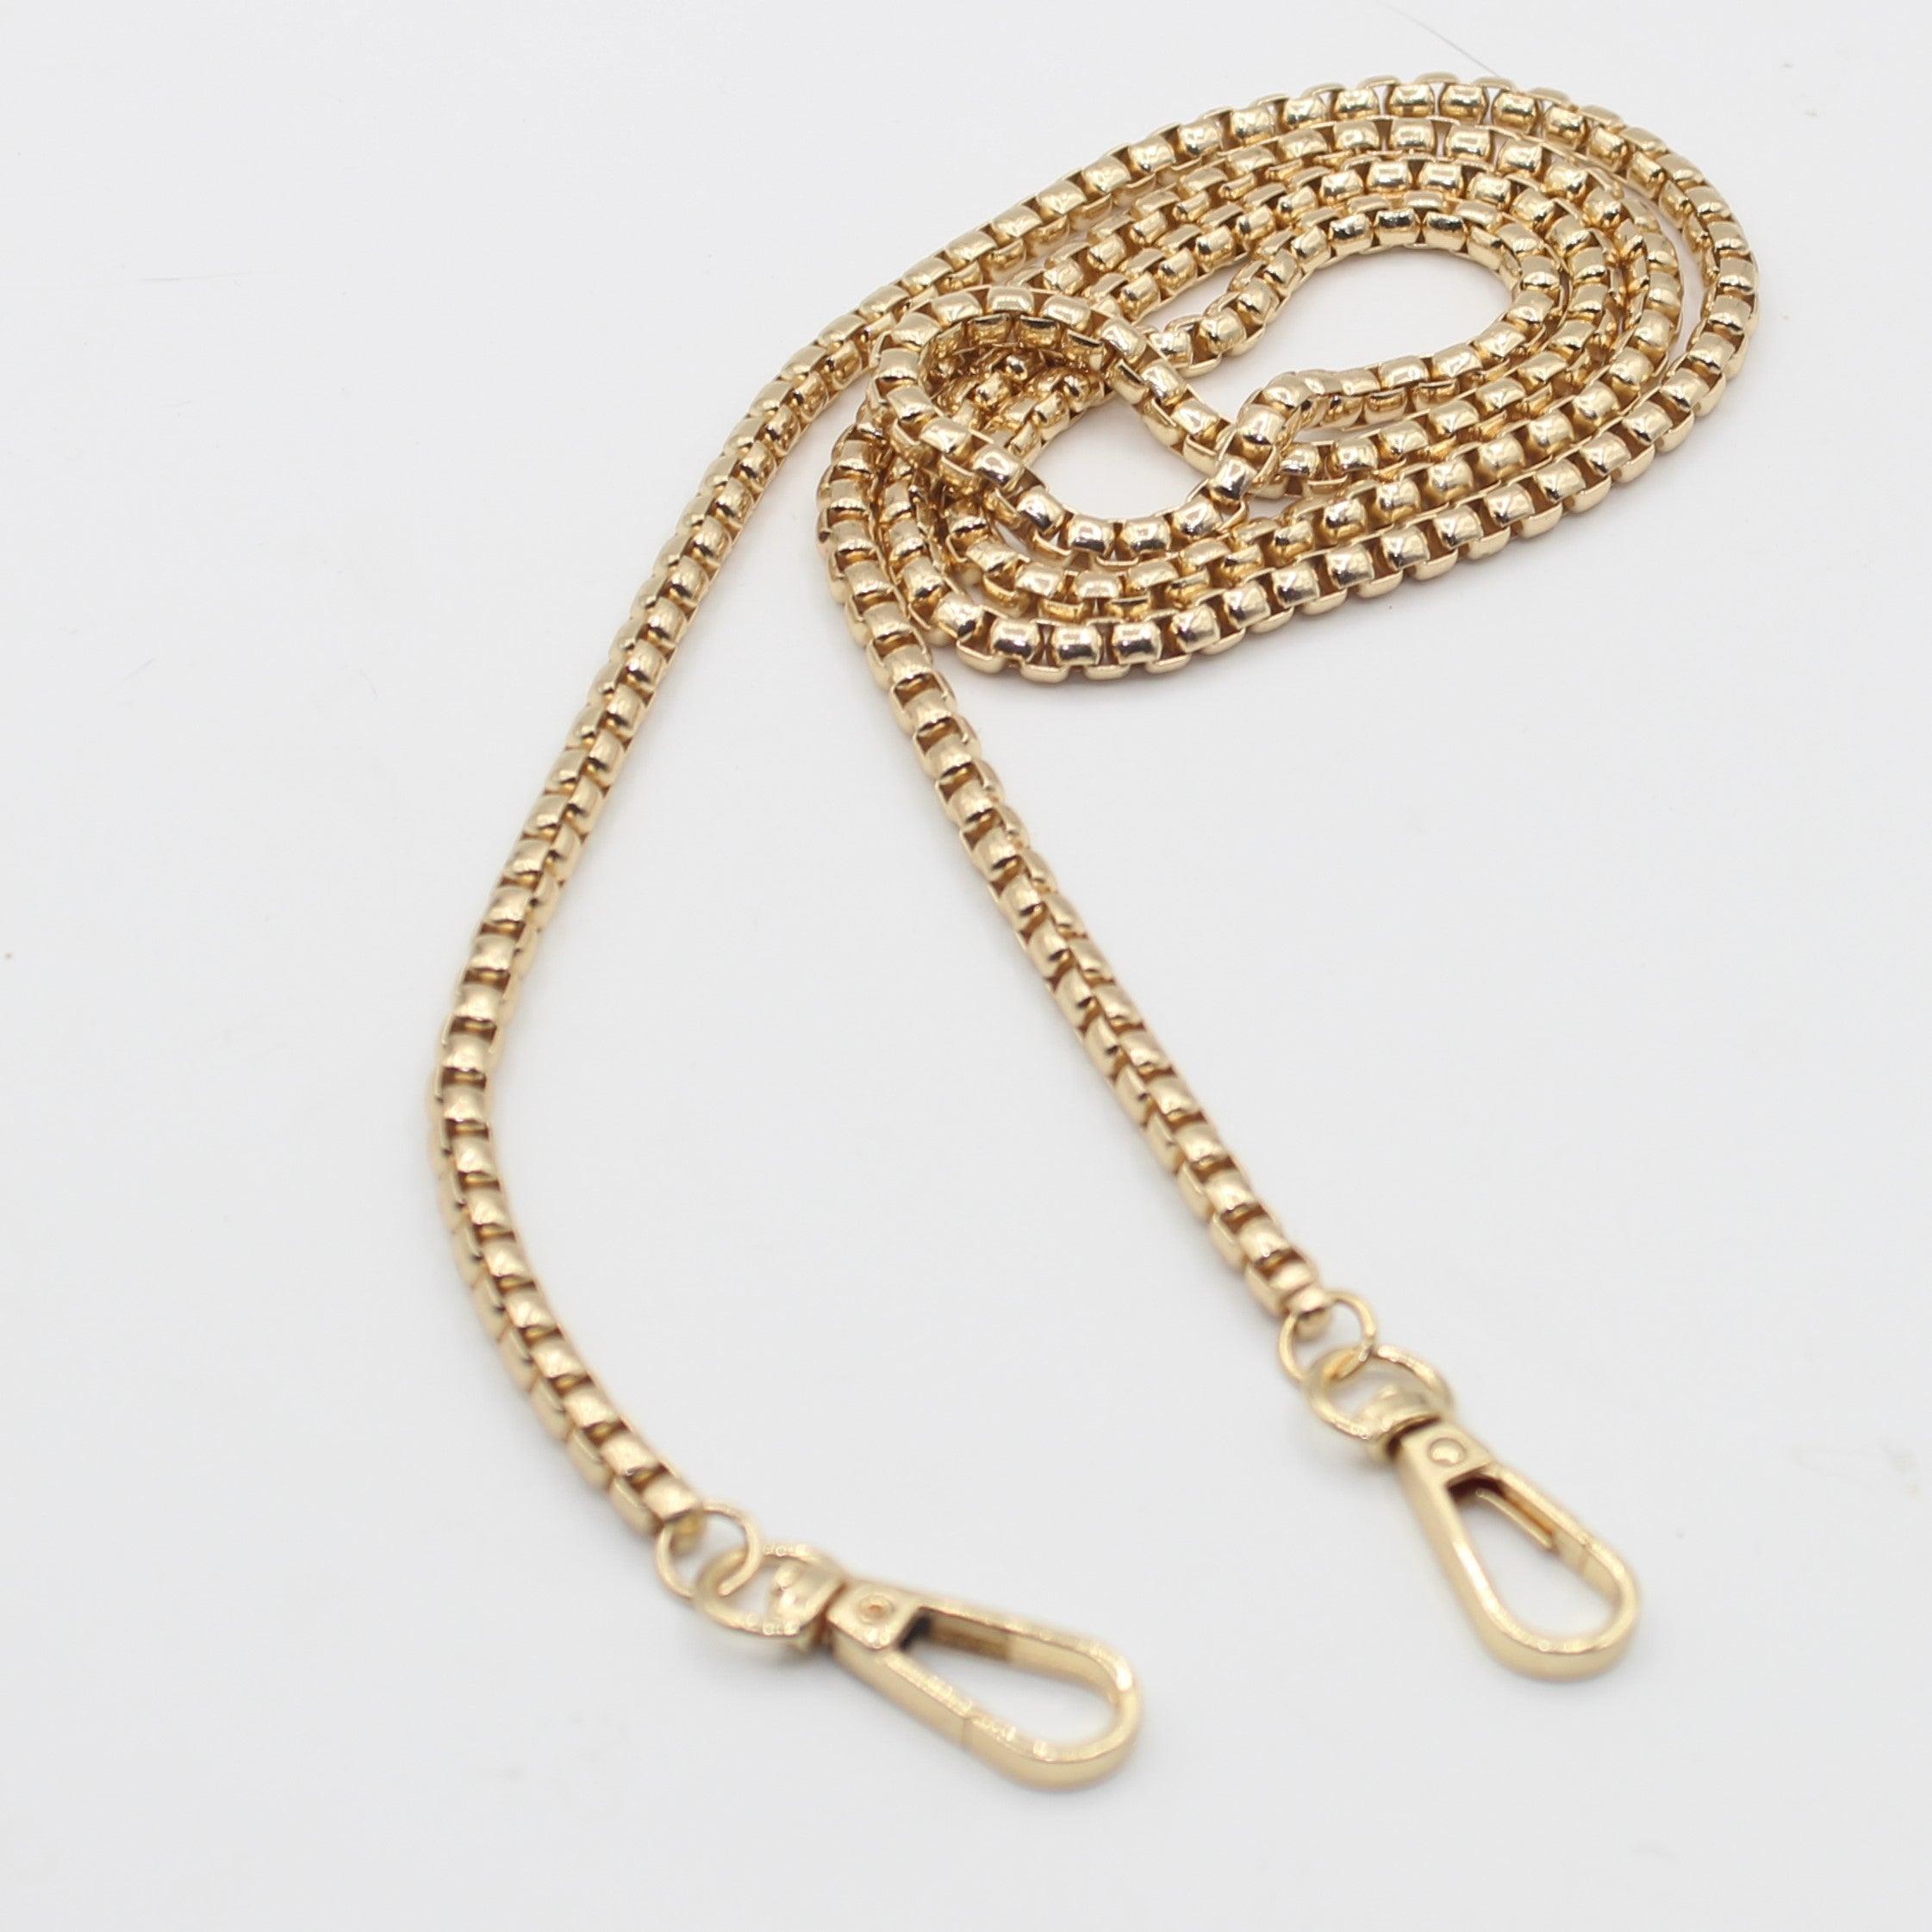 120cm long Chain with Lobsters (5mm rings) #CHAIN535 - ACCESSOIRES LEDUC BV